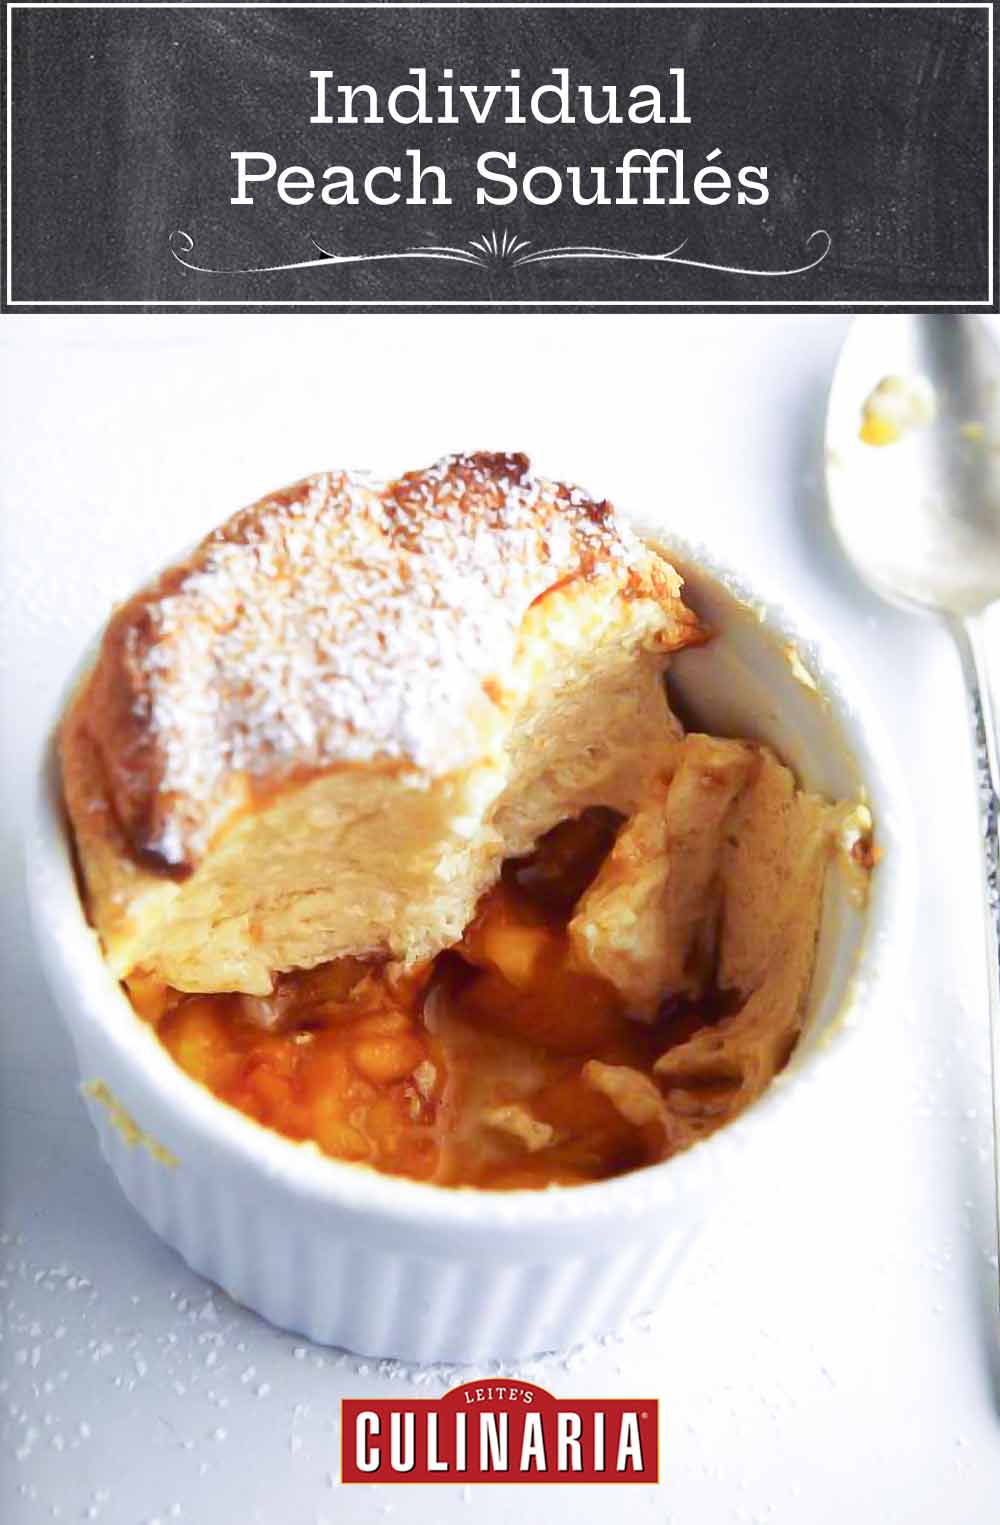 White dish of a sugar-dusted individual peach souffle; in the bottom are peach slices